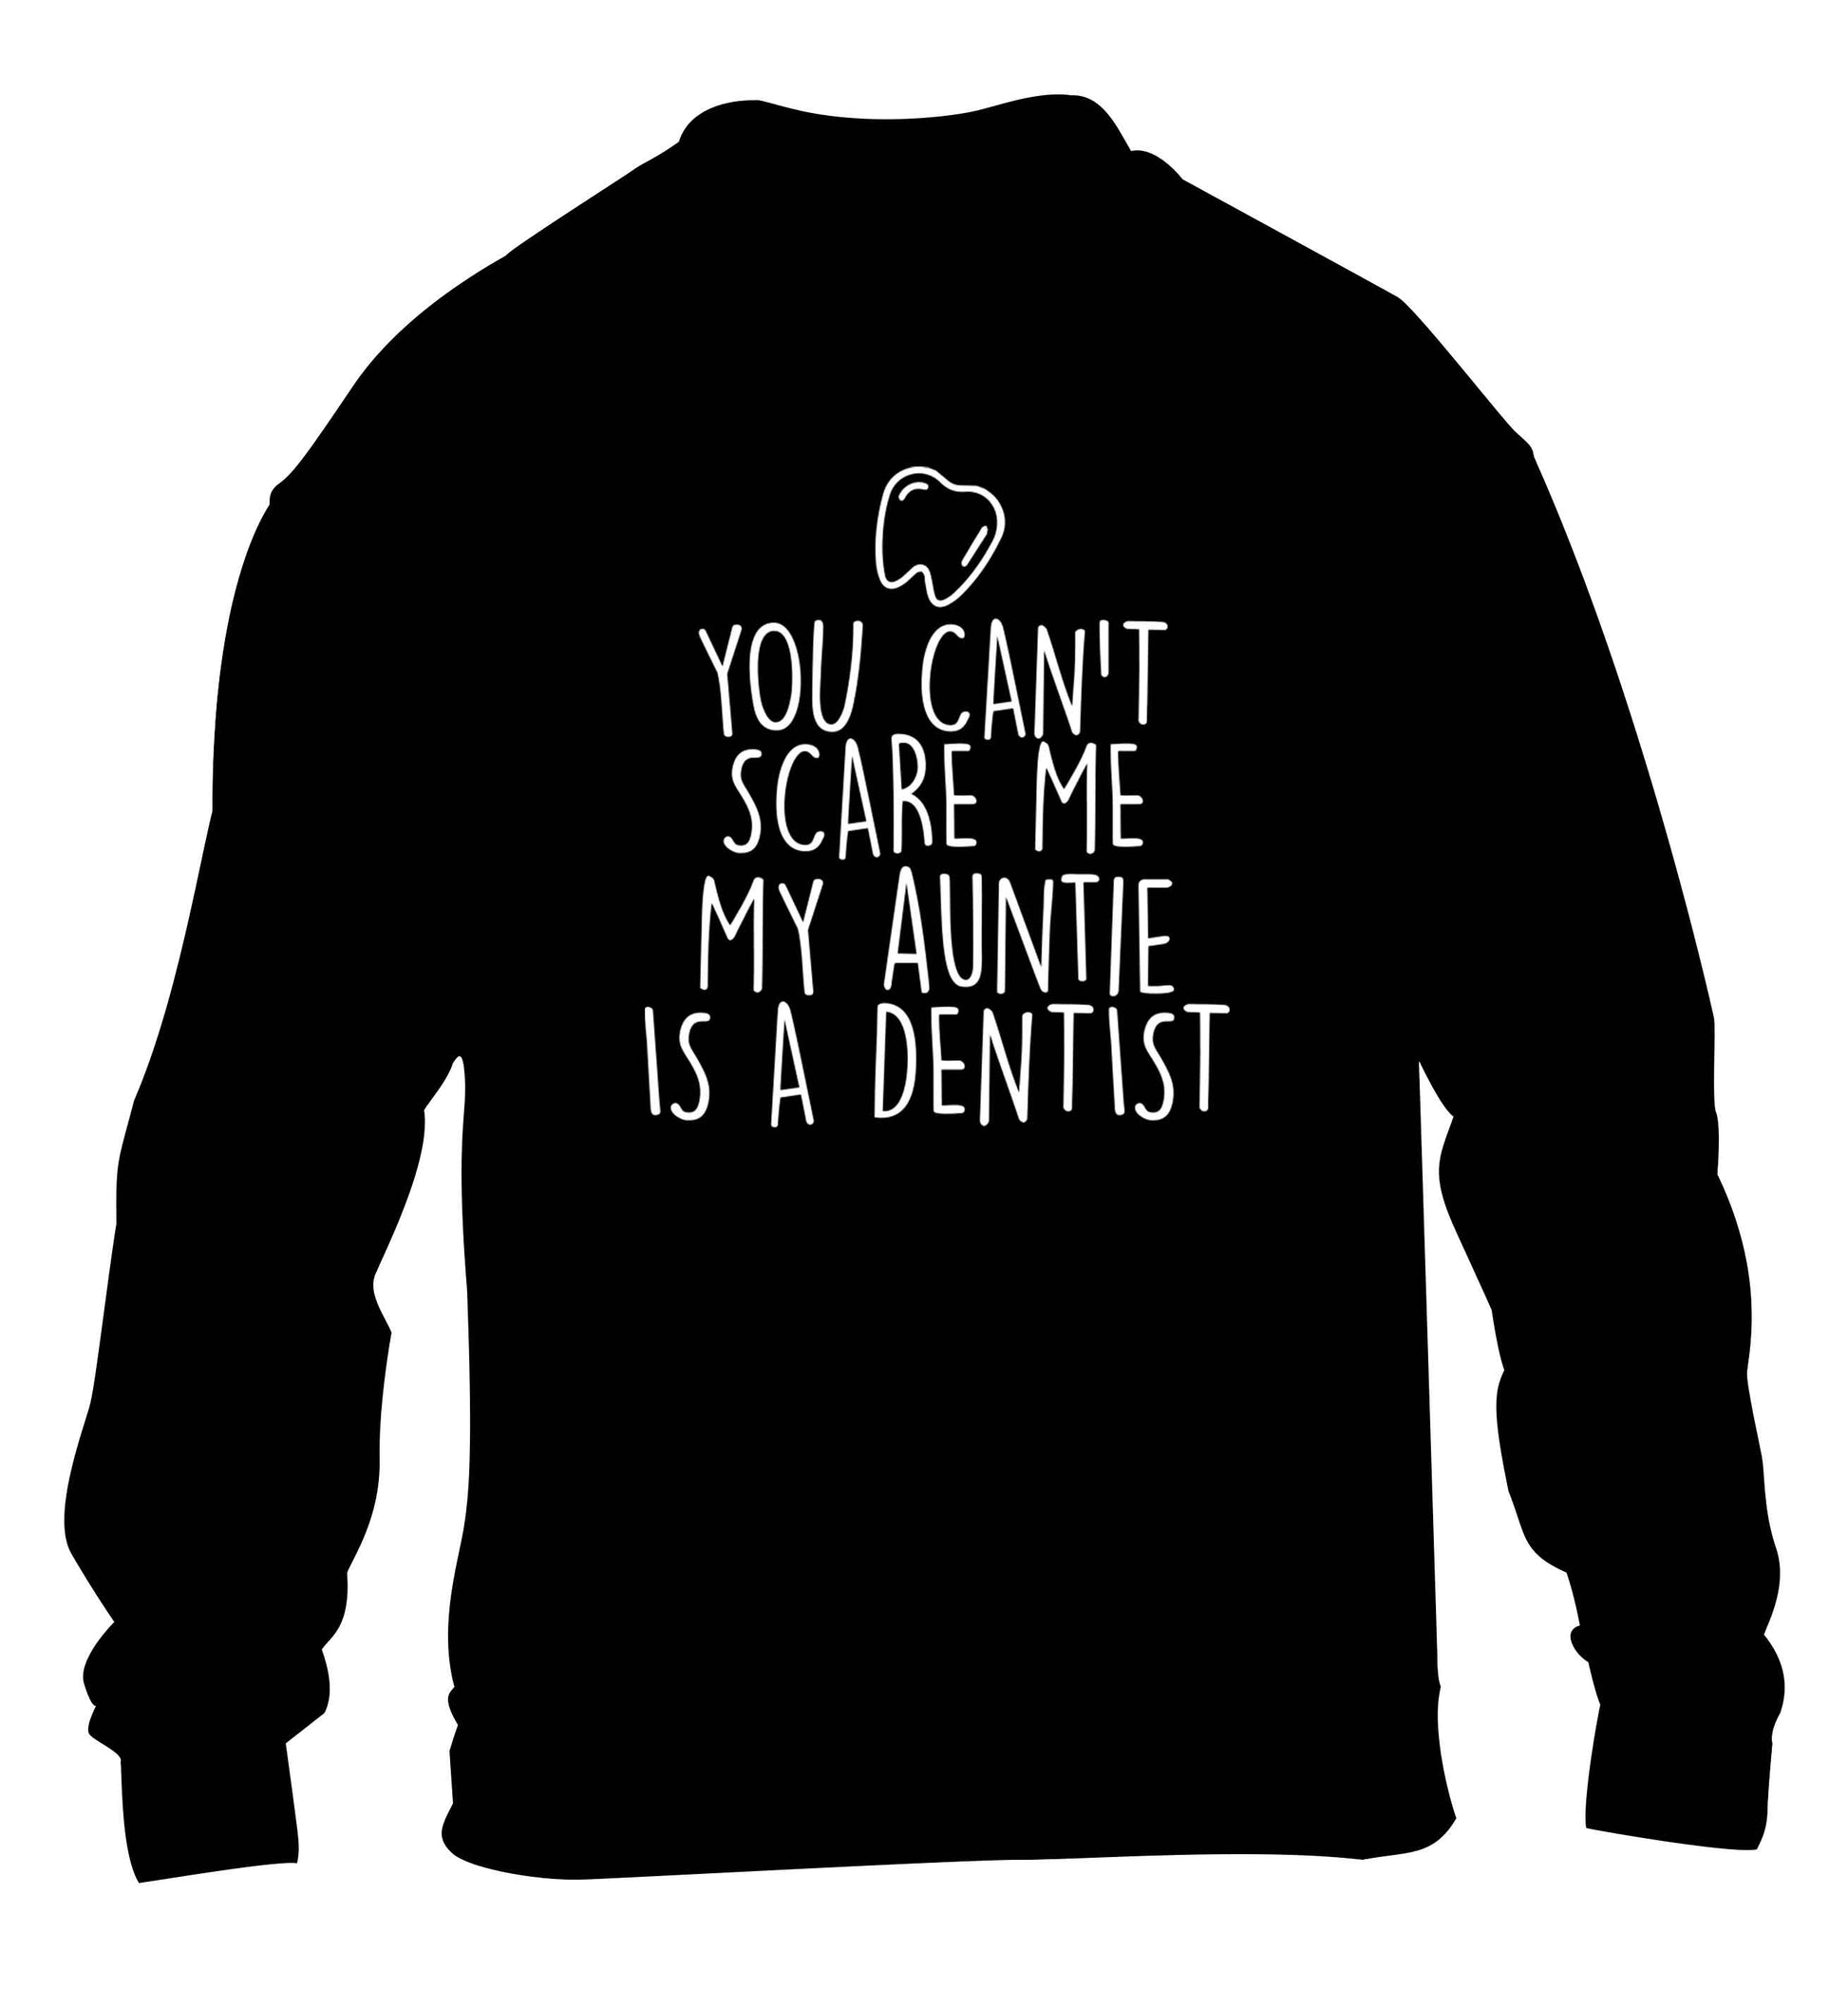 You can't scare me my auntie is a dentist children's black sweater 12-13 Years